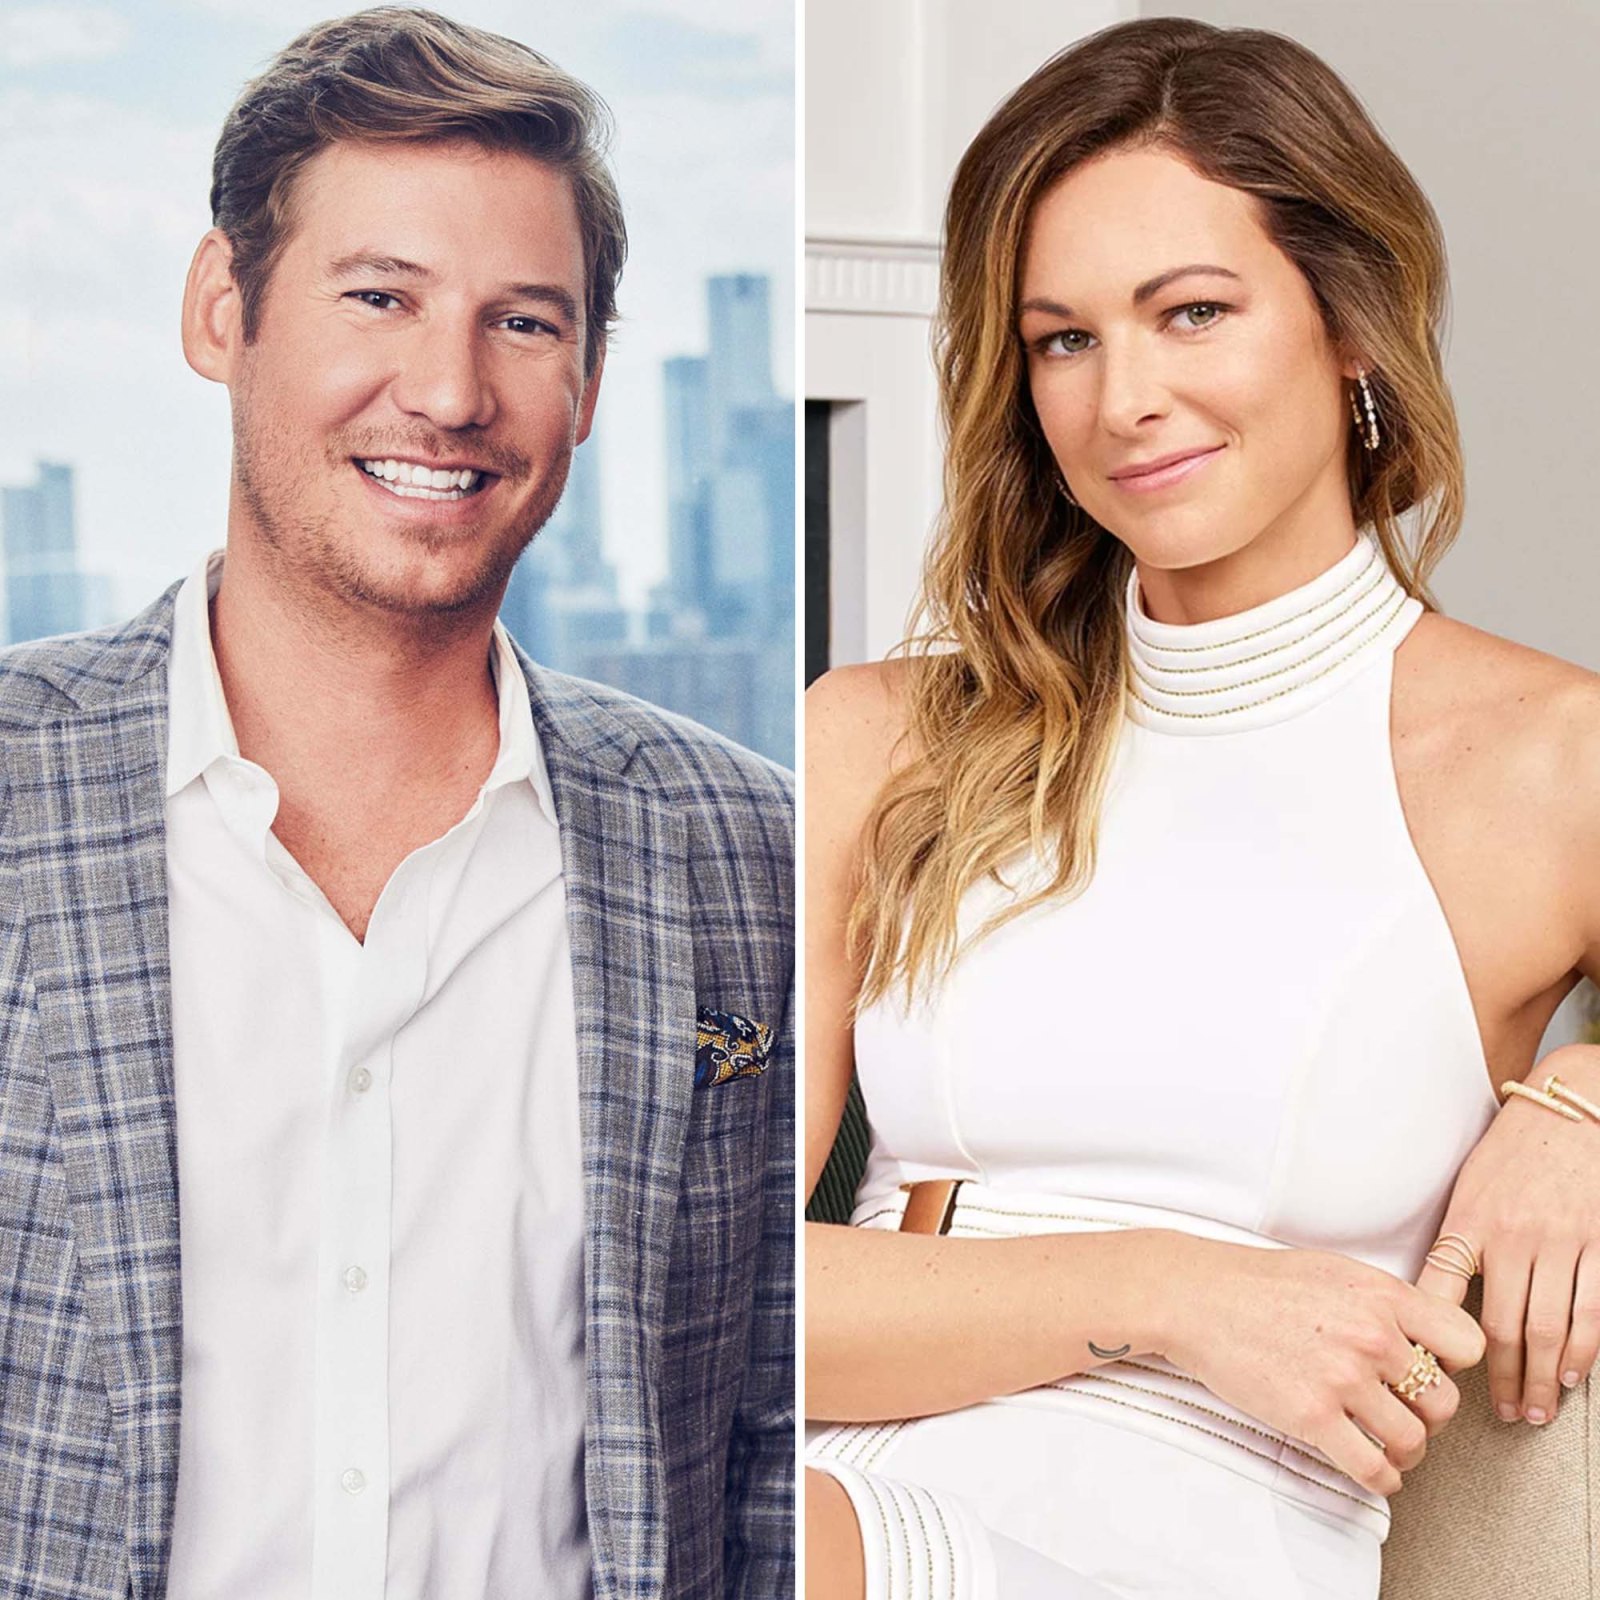 Southern Charm A Guide Who Has Dated Each Other